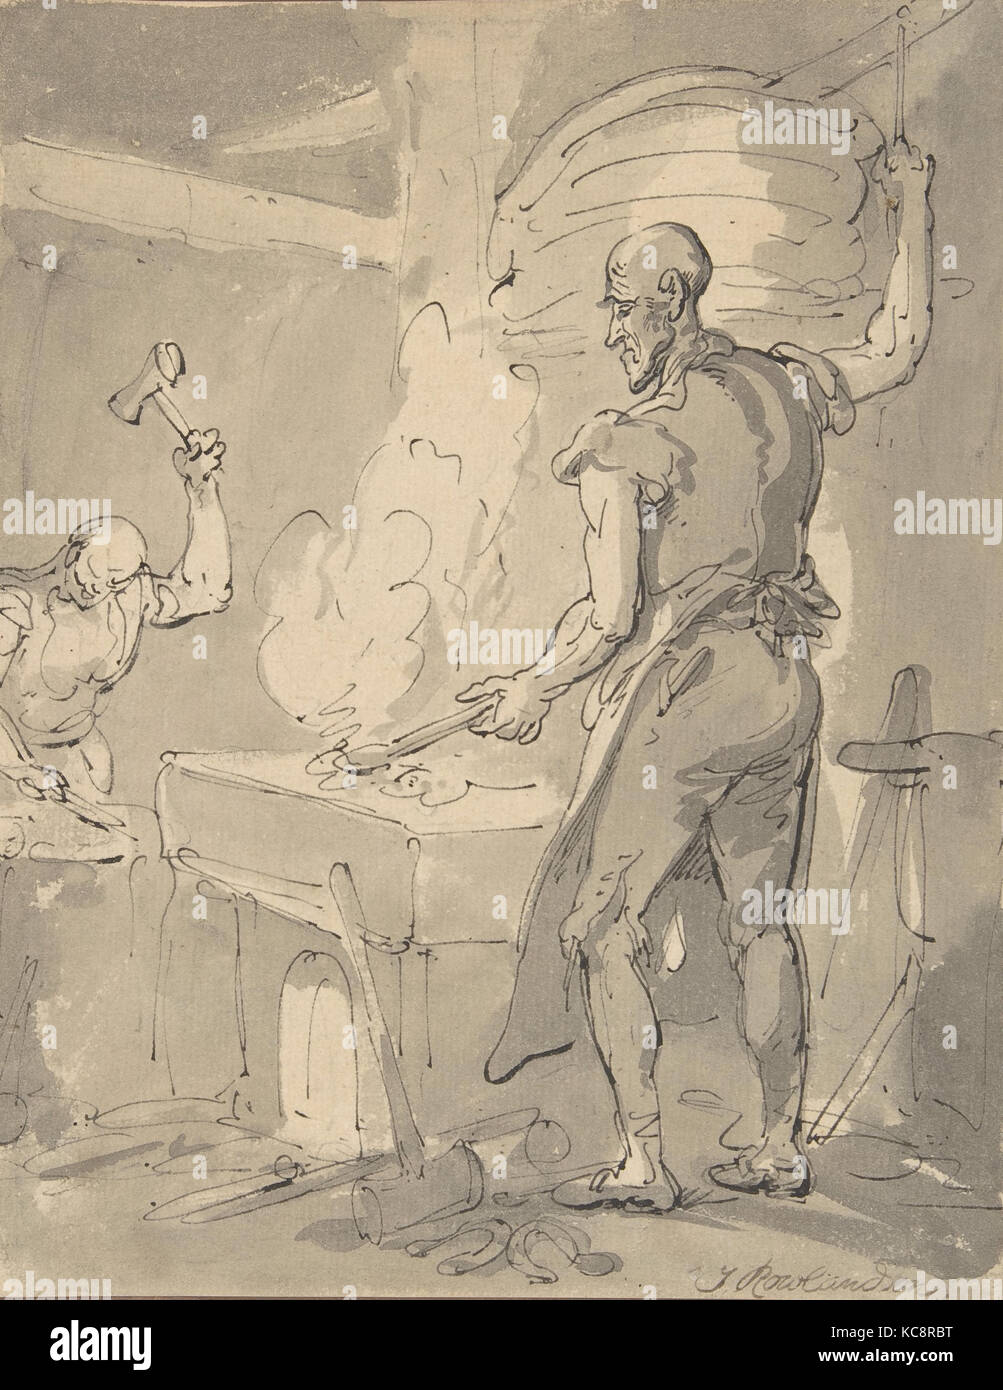 A Blacksmith, 18th–19th century, Pen and black ink, grey wash, sheet: 9 5/8 x 7 1/2 in. (24.4 x 19.1 cm), Drawings Stock Photo